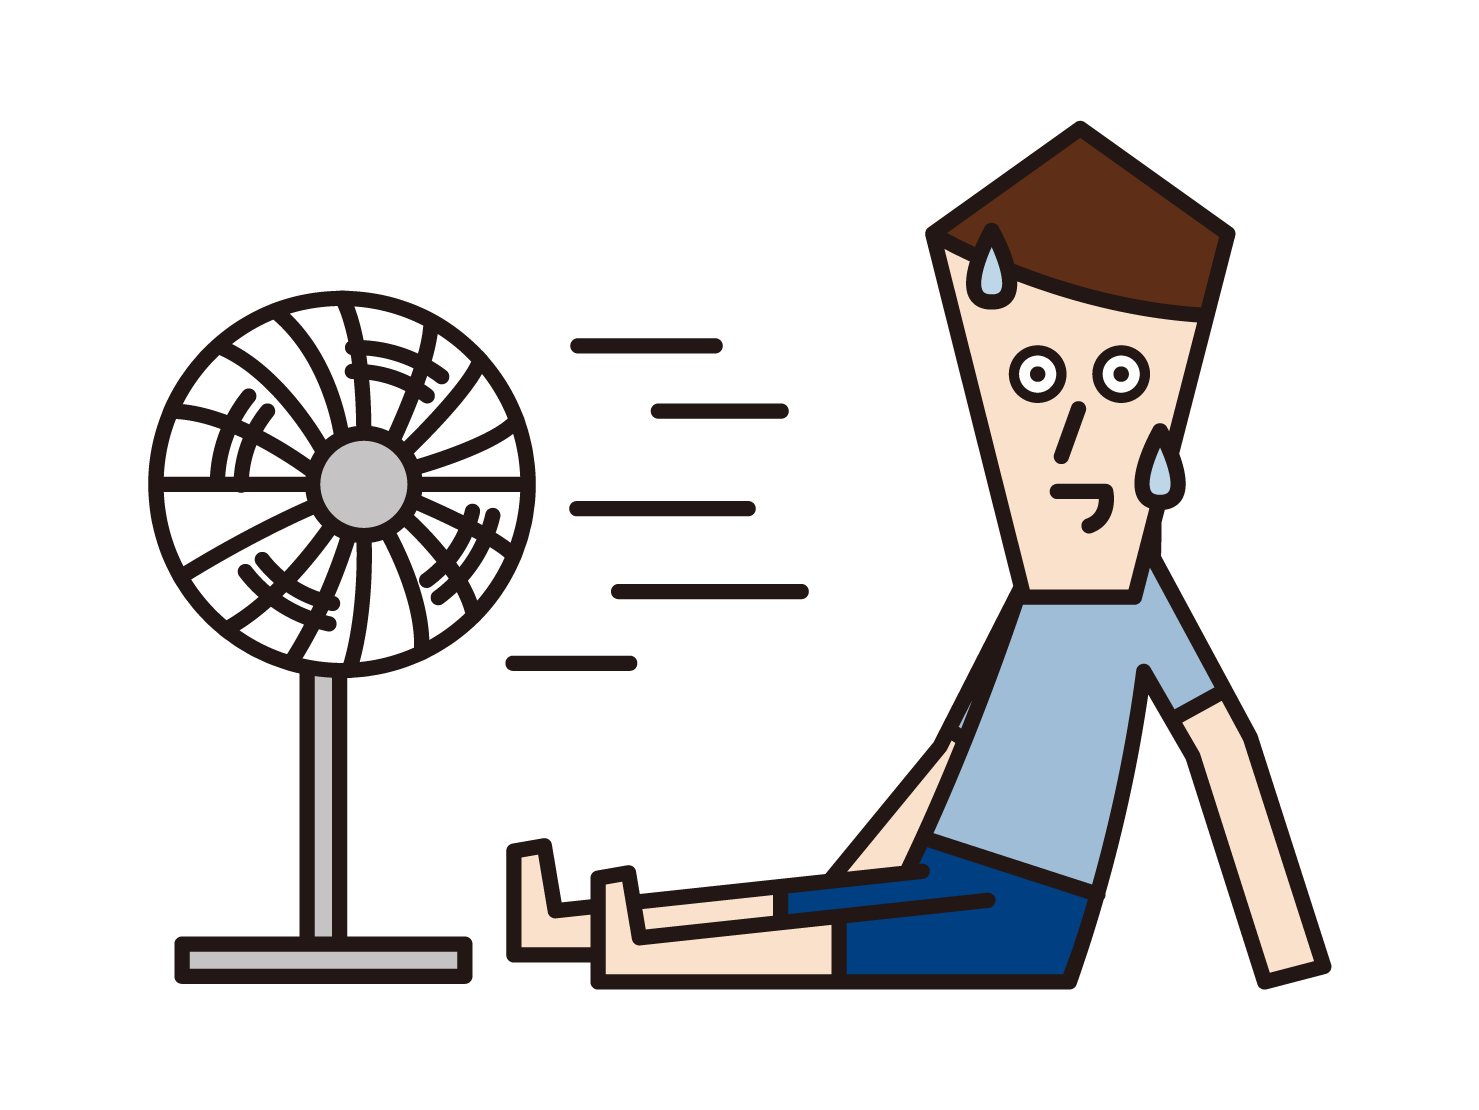 Illustration of a woman cooling down in the wind of a fan